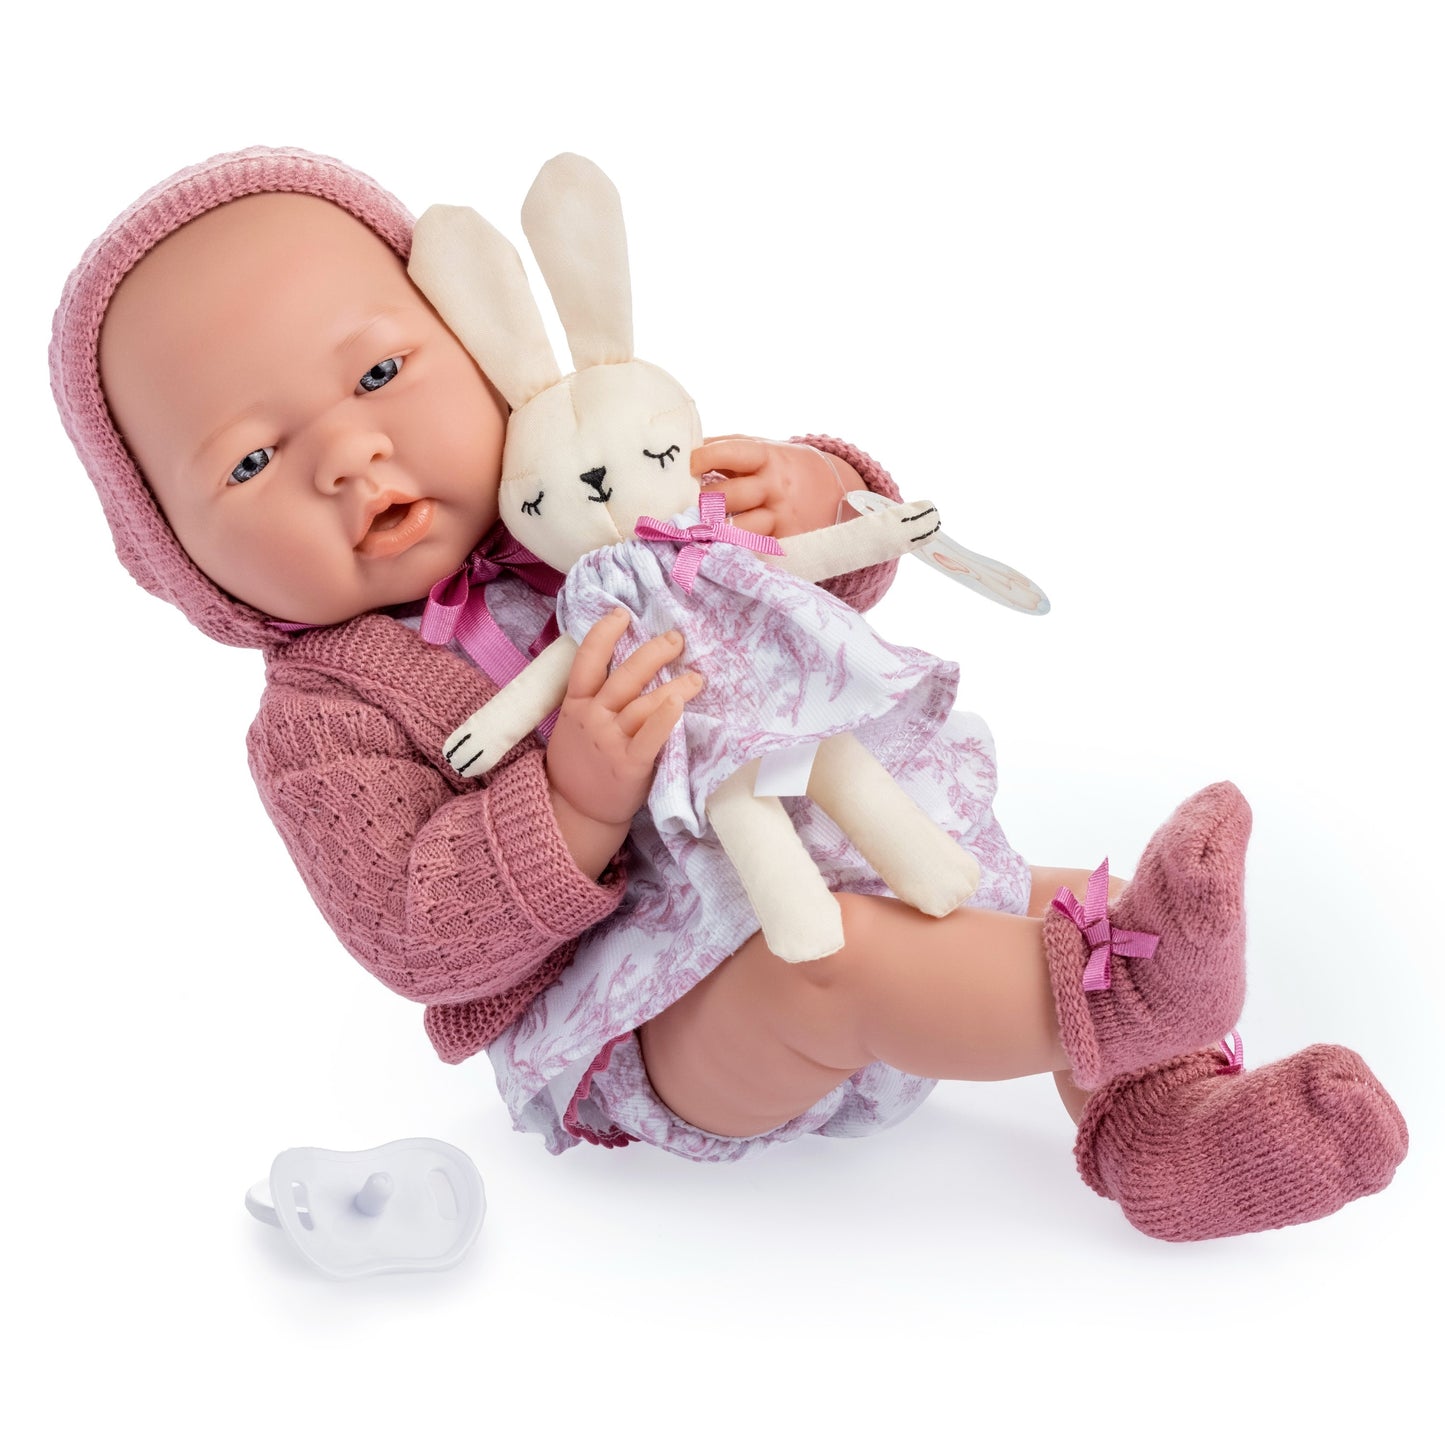 JC Toys La Newborn ROYAL Collection 15" All-Vinyl Anatomically Correct Real Girl Baby Doll Pink Gift Set Ages 2+